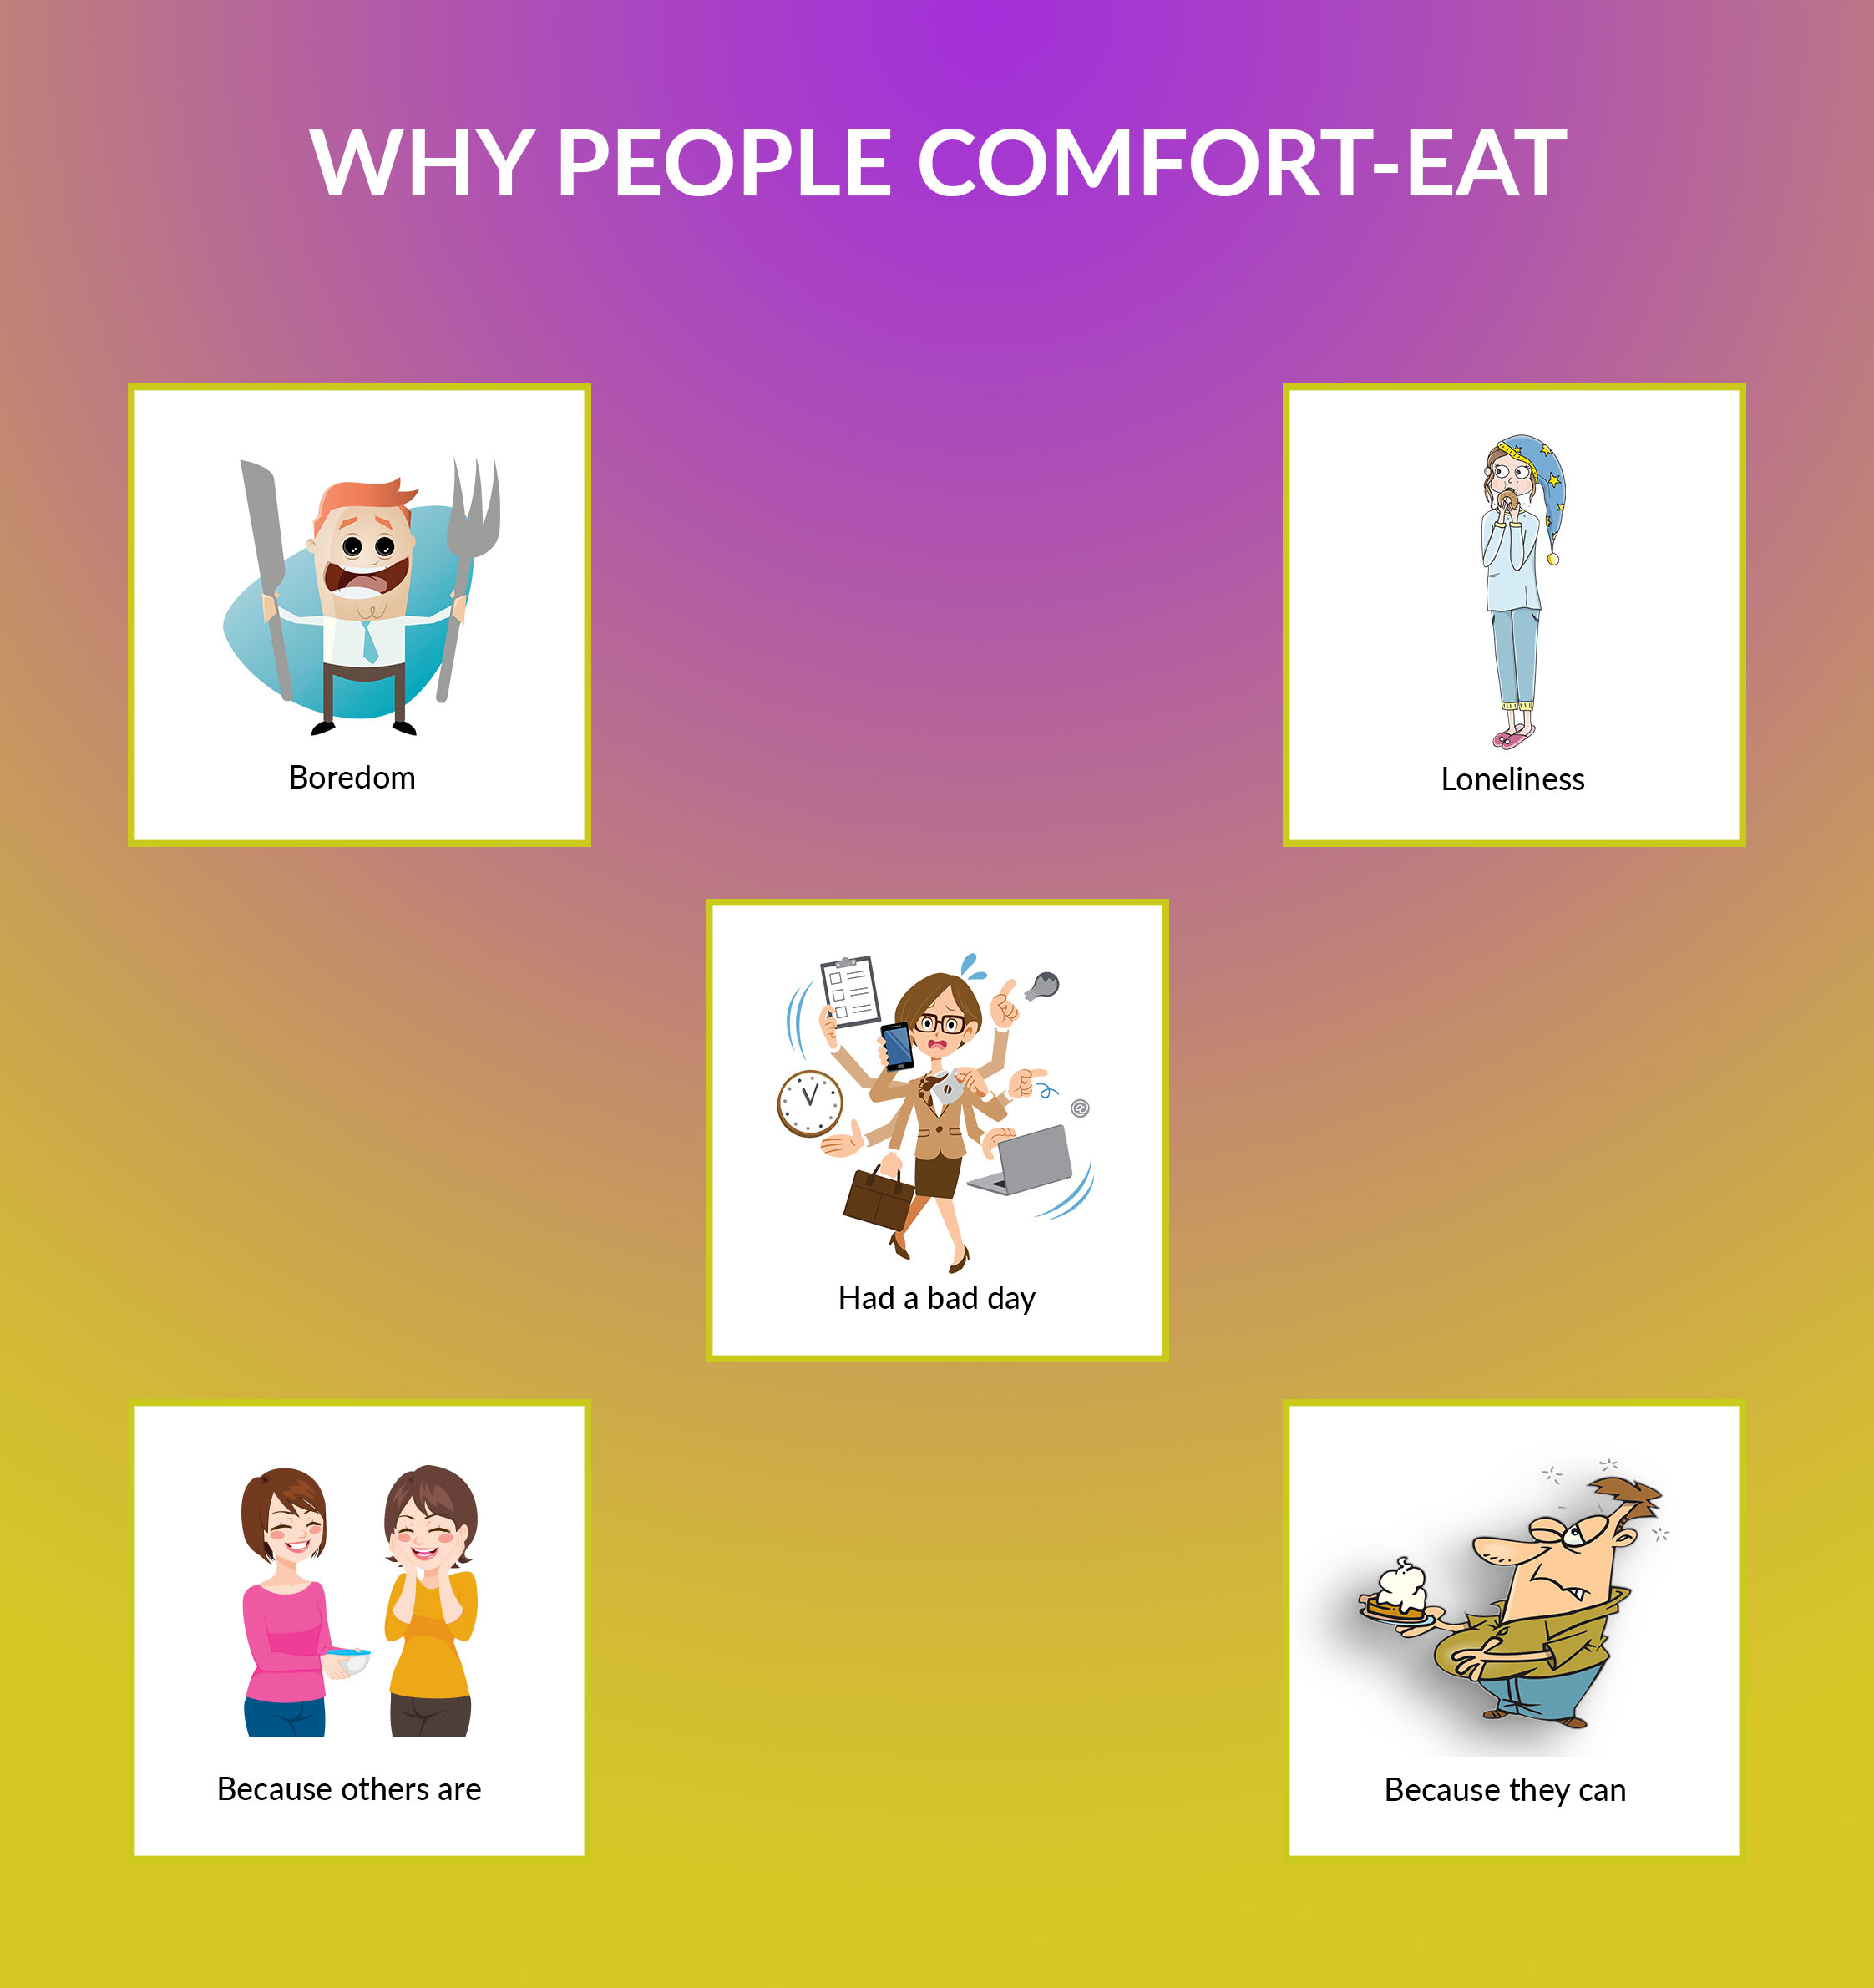 Why people eat to comfort themselves